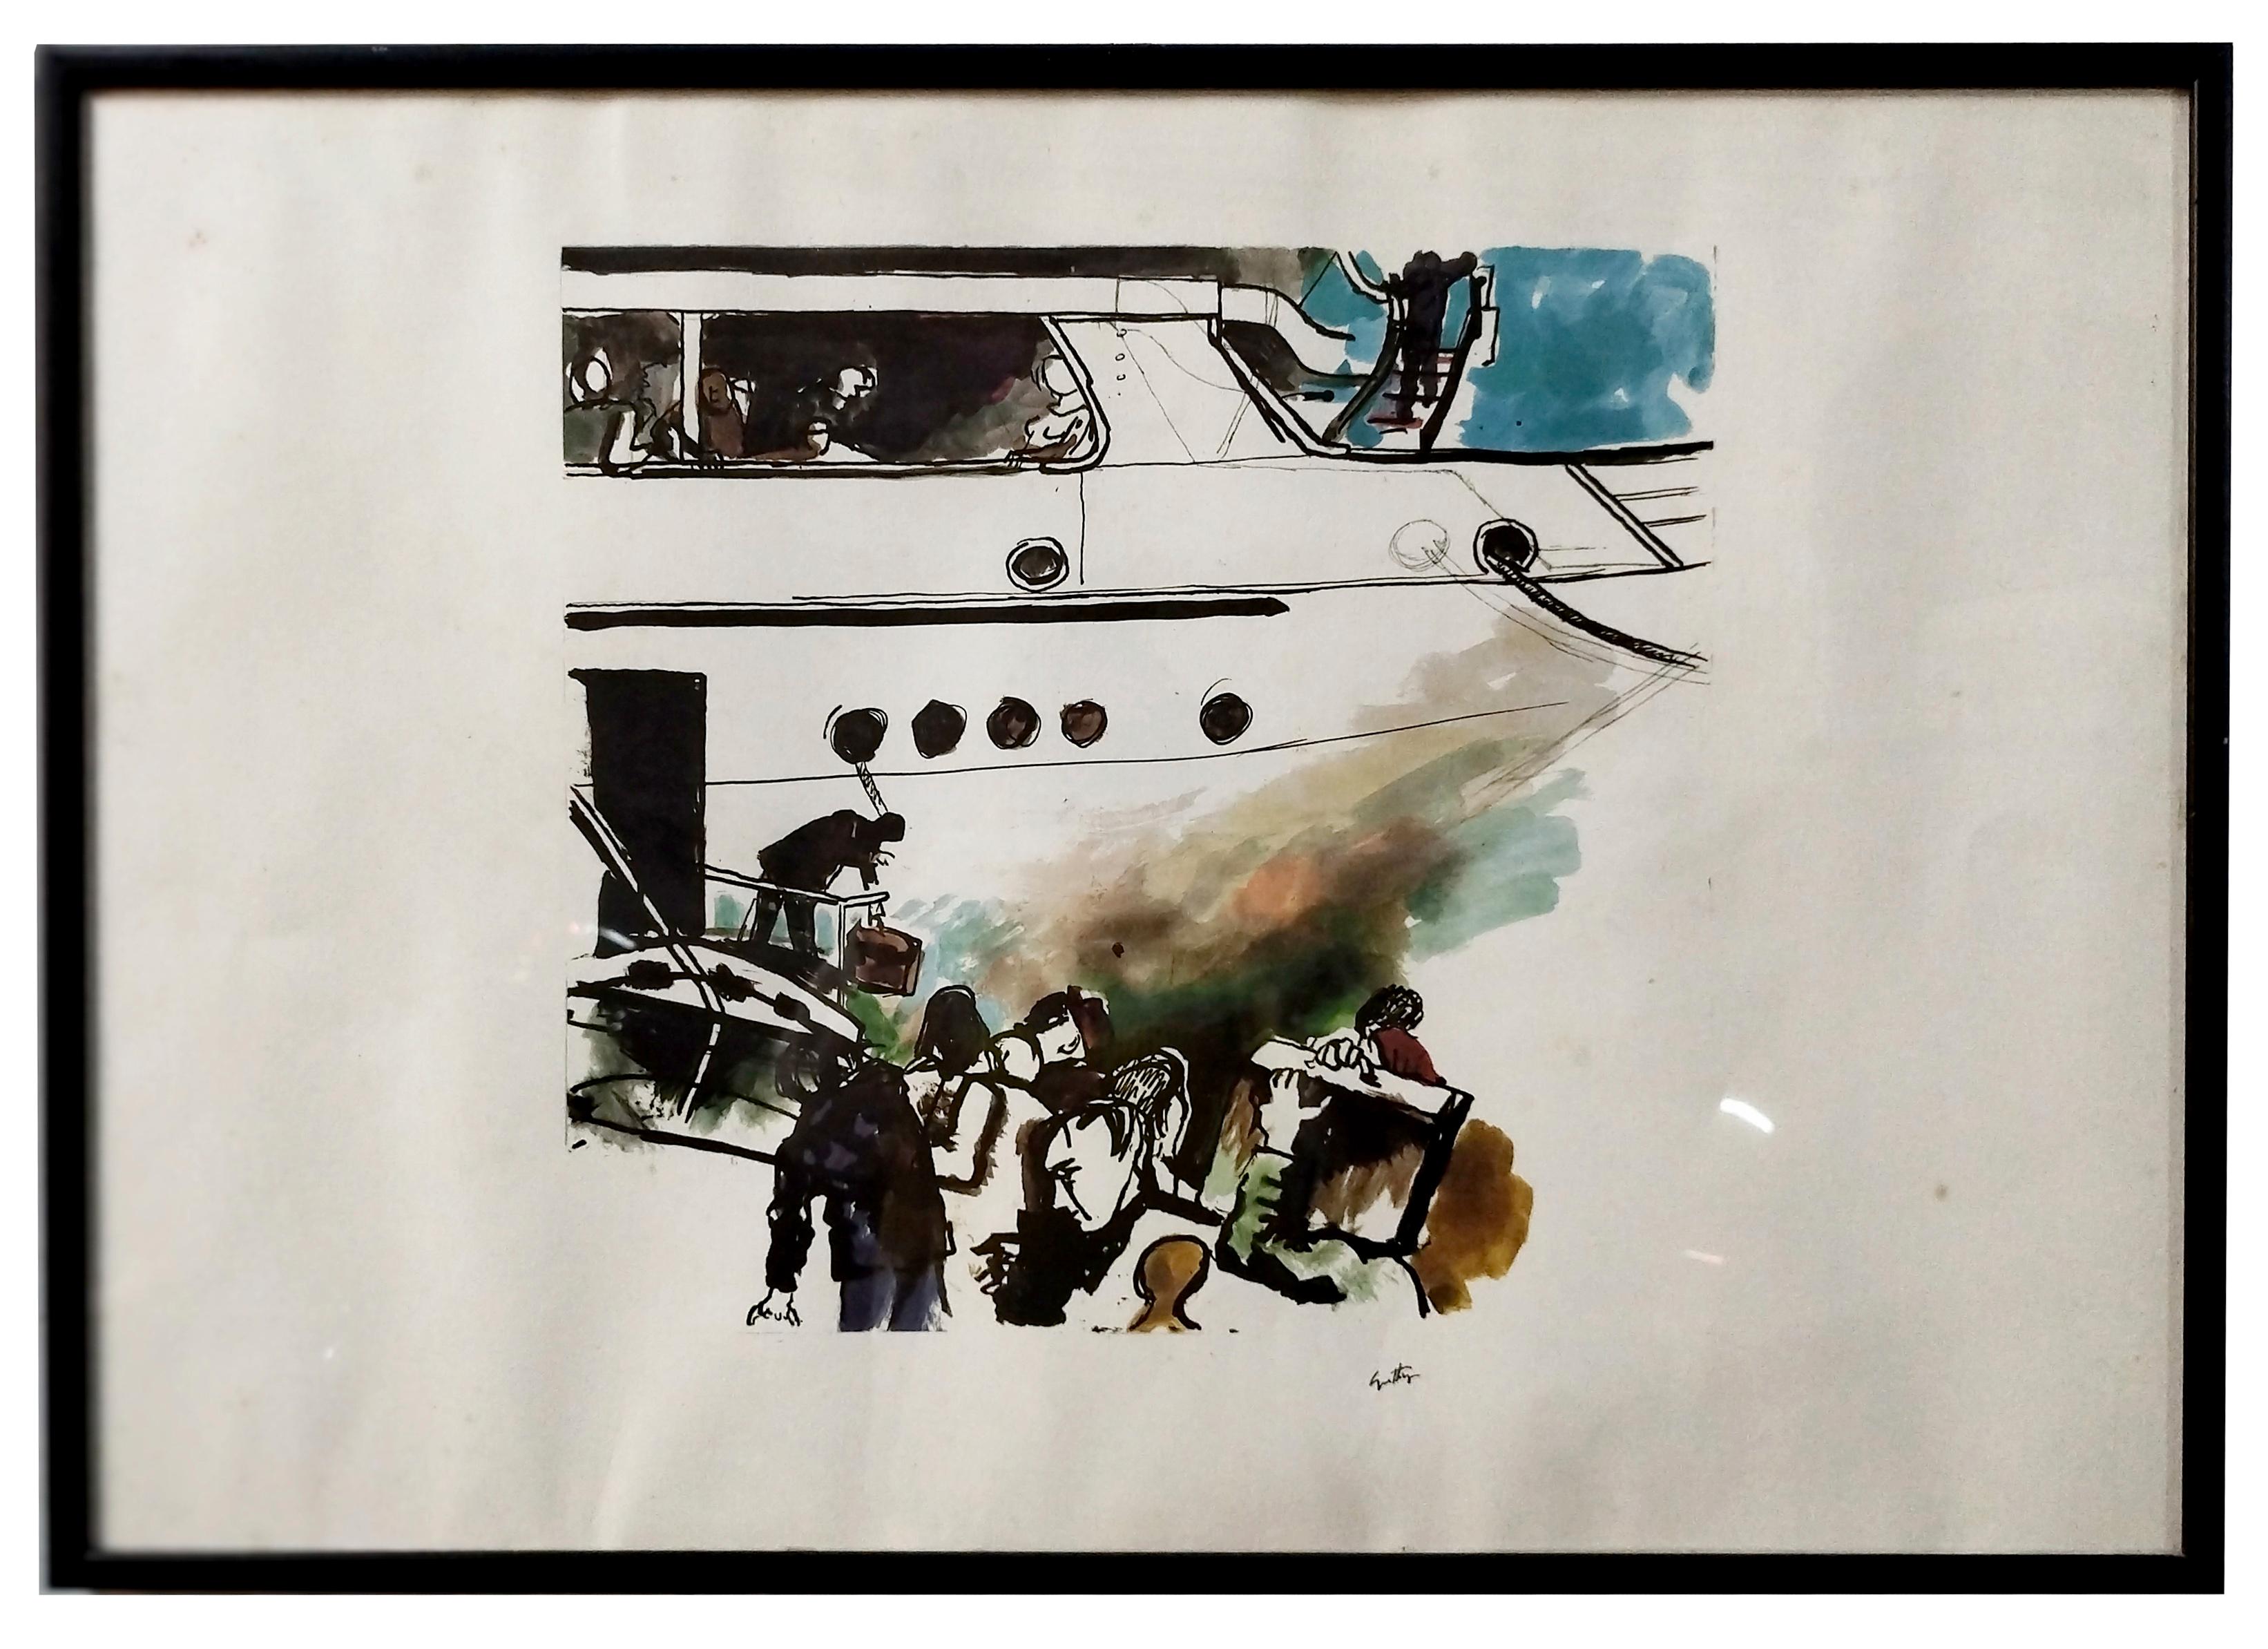 Lithograph  of  Renato Guttuso signed It is part of the collection "Renato Guttuso drawings 1938-1972."

Published in a limited edition in 1972 by Officine Grafiche Elli & Pagani. Reproductions are by Colorlito of Milan, binding by Salvatore Tonti